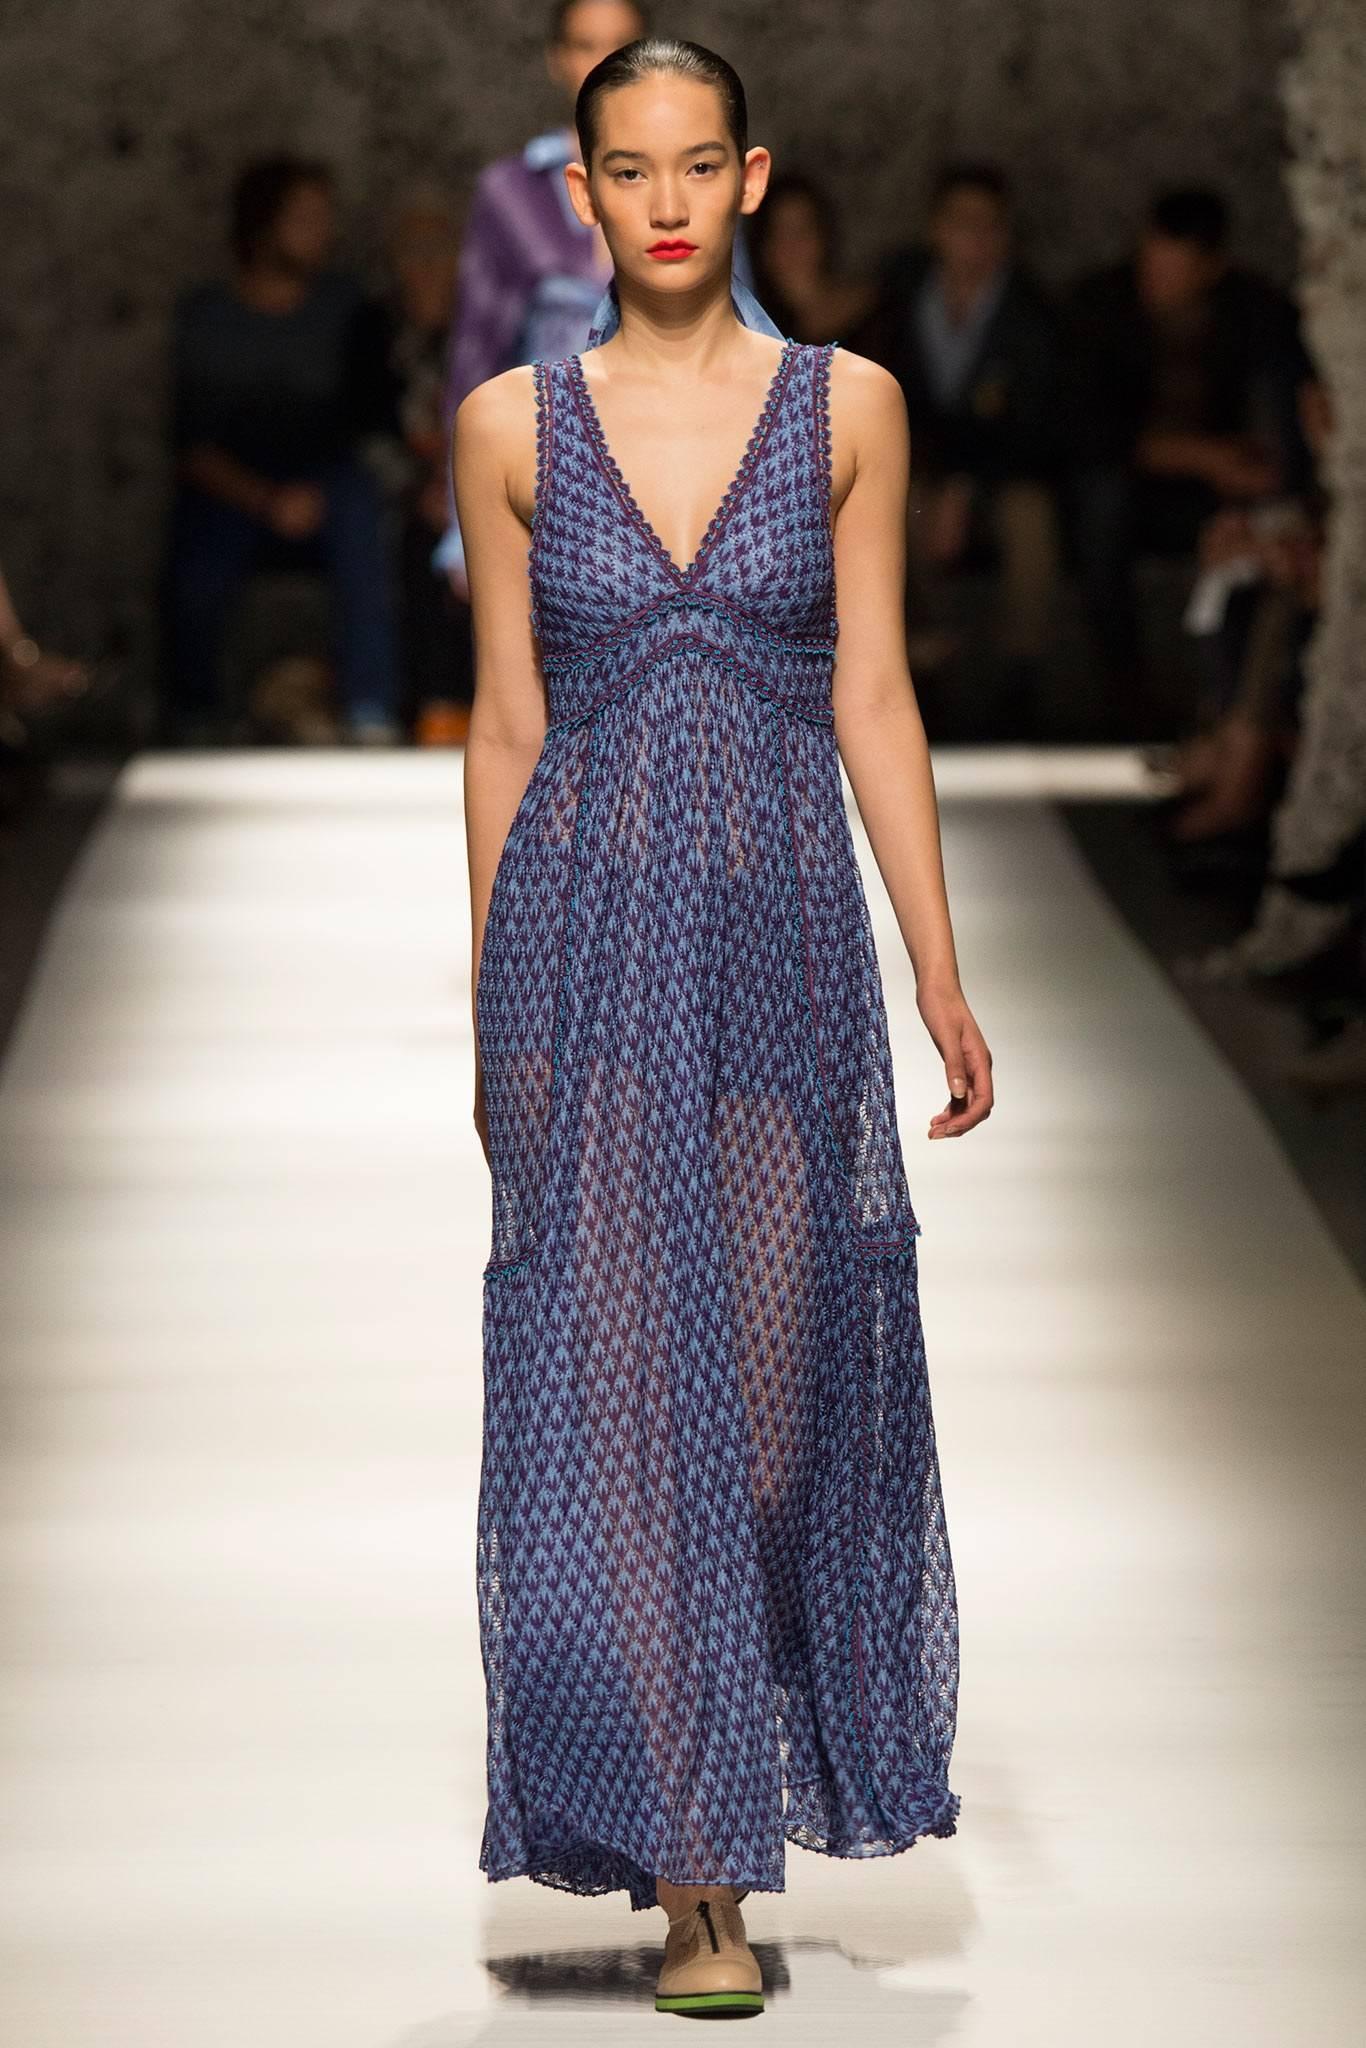 Missoni Spring 2015 runway gown. Purple and periwinkle blue signature knit. Unlike the runway version pictured, this gown is lined with silk and is not sheer. Fastens at side bust with hook and eye closures and snaps. Tagged size IT 42 (USA 6).